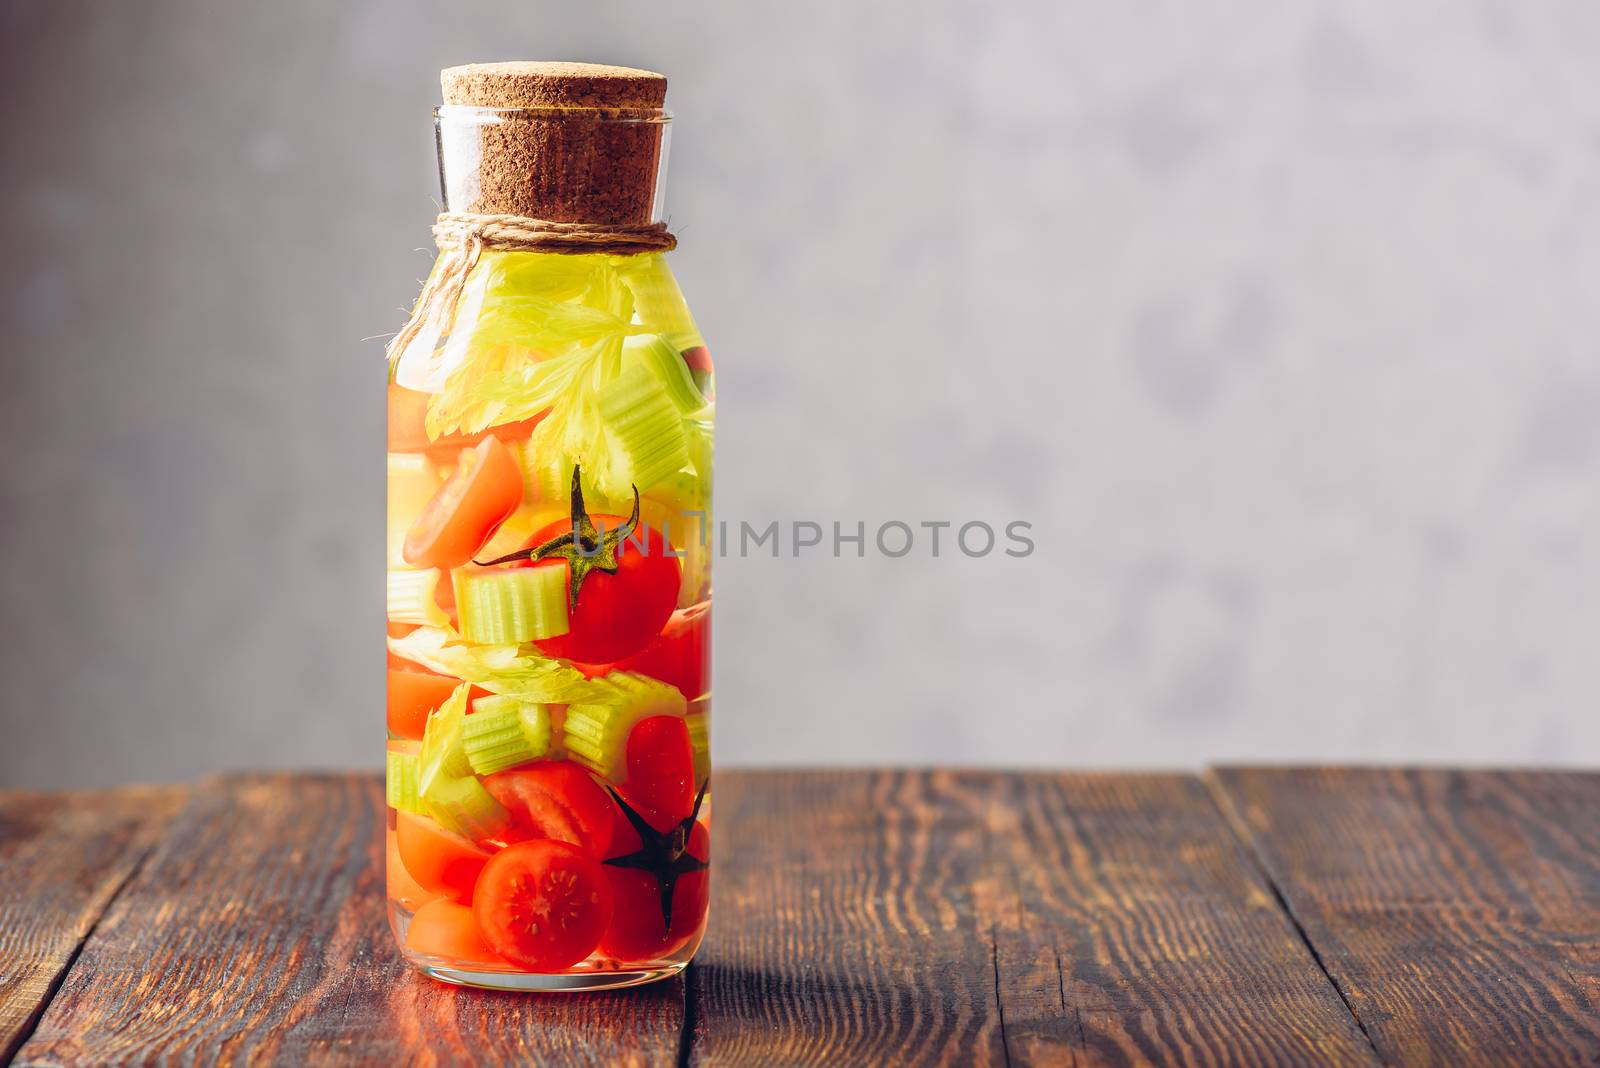 Bottle Of Water with Tomato and Celery. by Seva_blsv